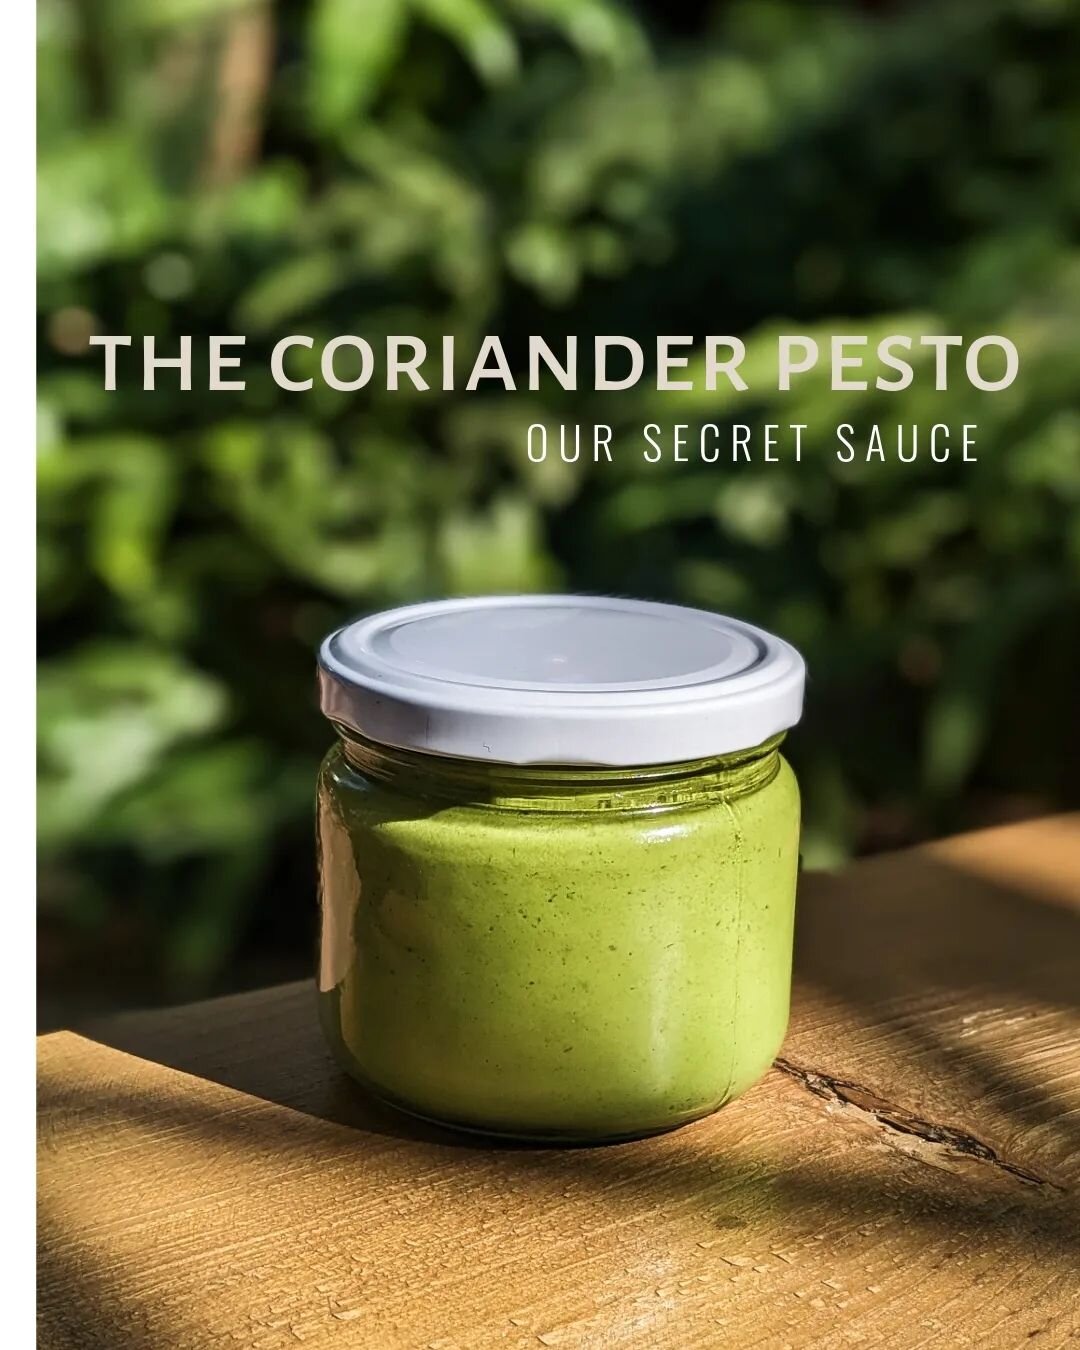 Revealing our tartine's secret layer of flavour : Coriander Pesto

The first layer spread on our crusty bread, has fresh coriander, roasted nuts, olive oil, garlic and zesty lime for the subtle kick. We believe that layering flavours is the key to al